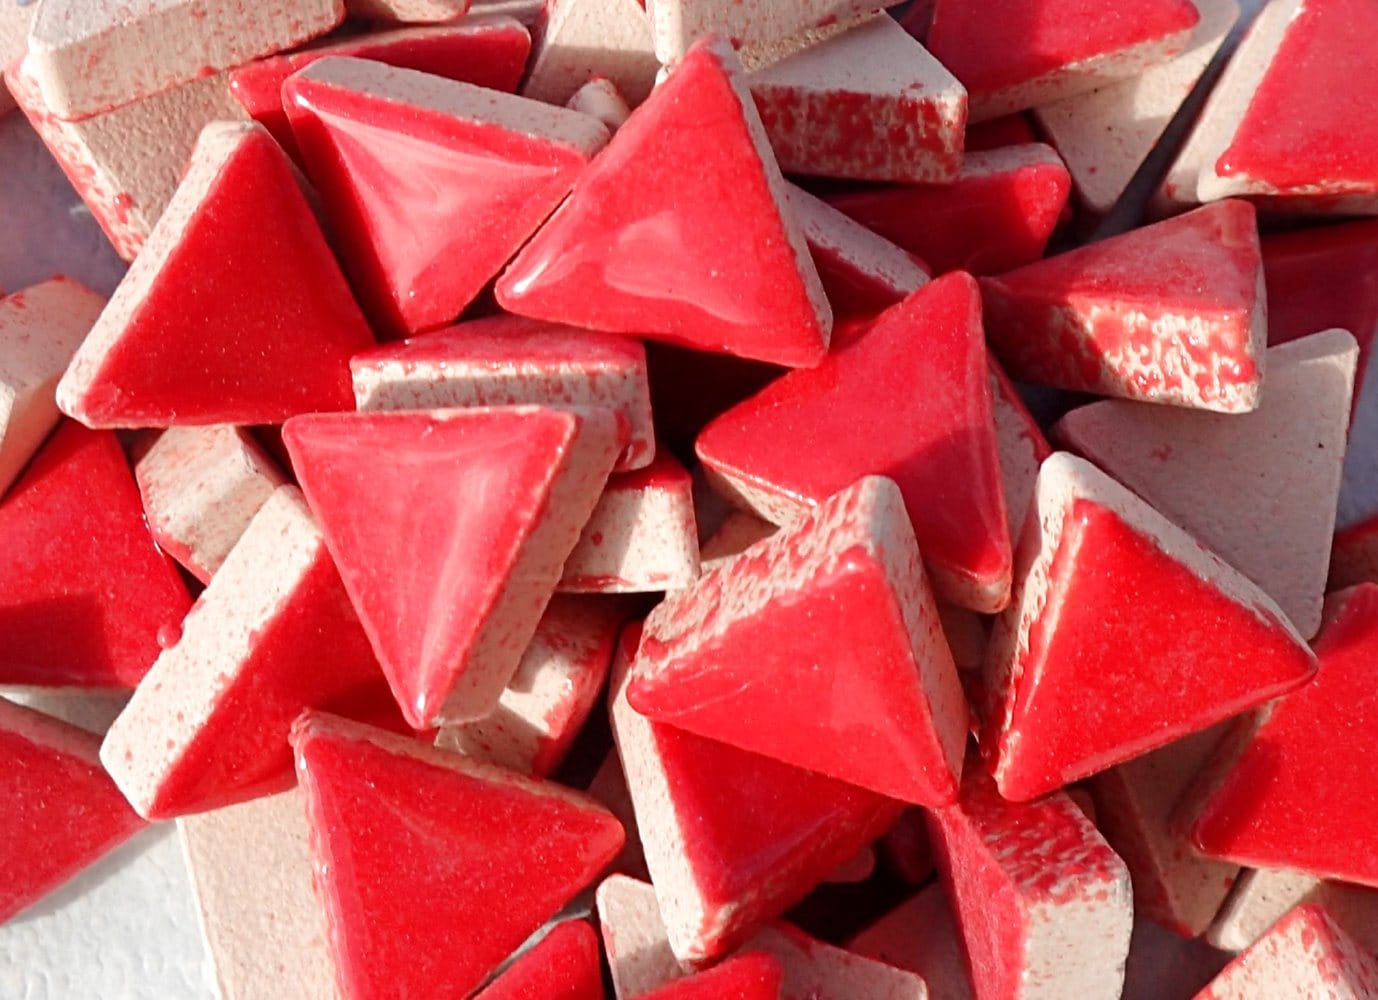 Bright Red Mini Triangles Mosaic Tiles - 50g Ceramic - 15mm in Lipstick Red